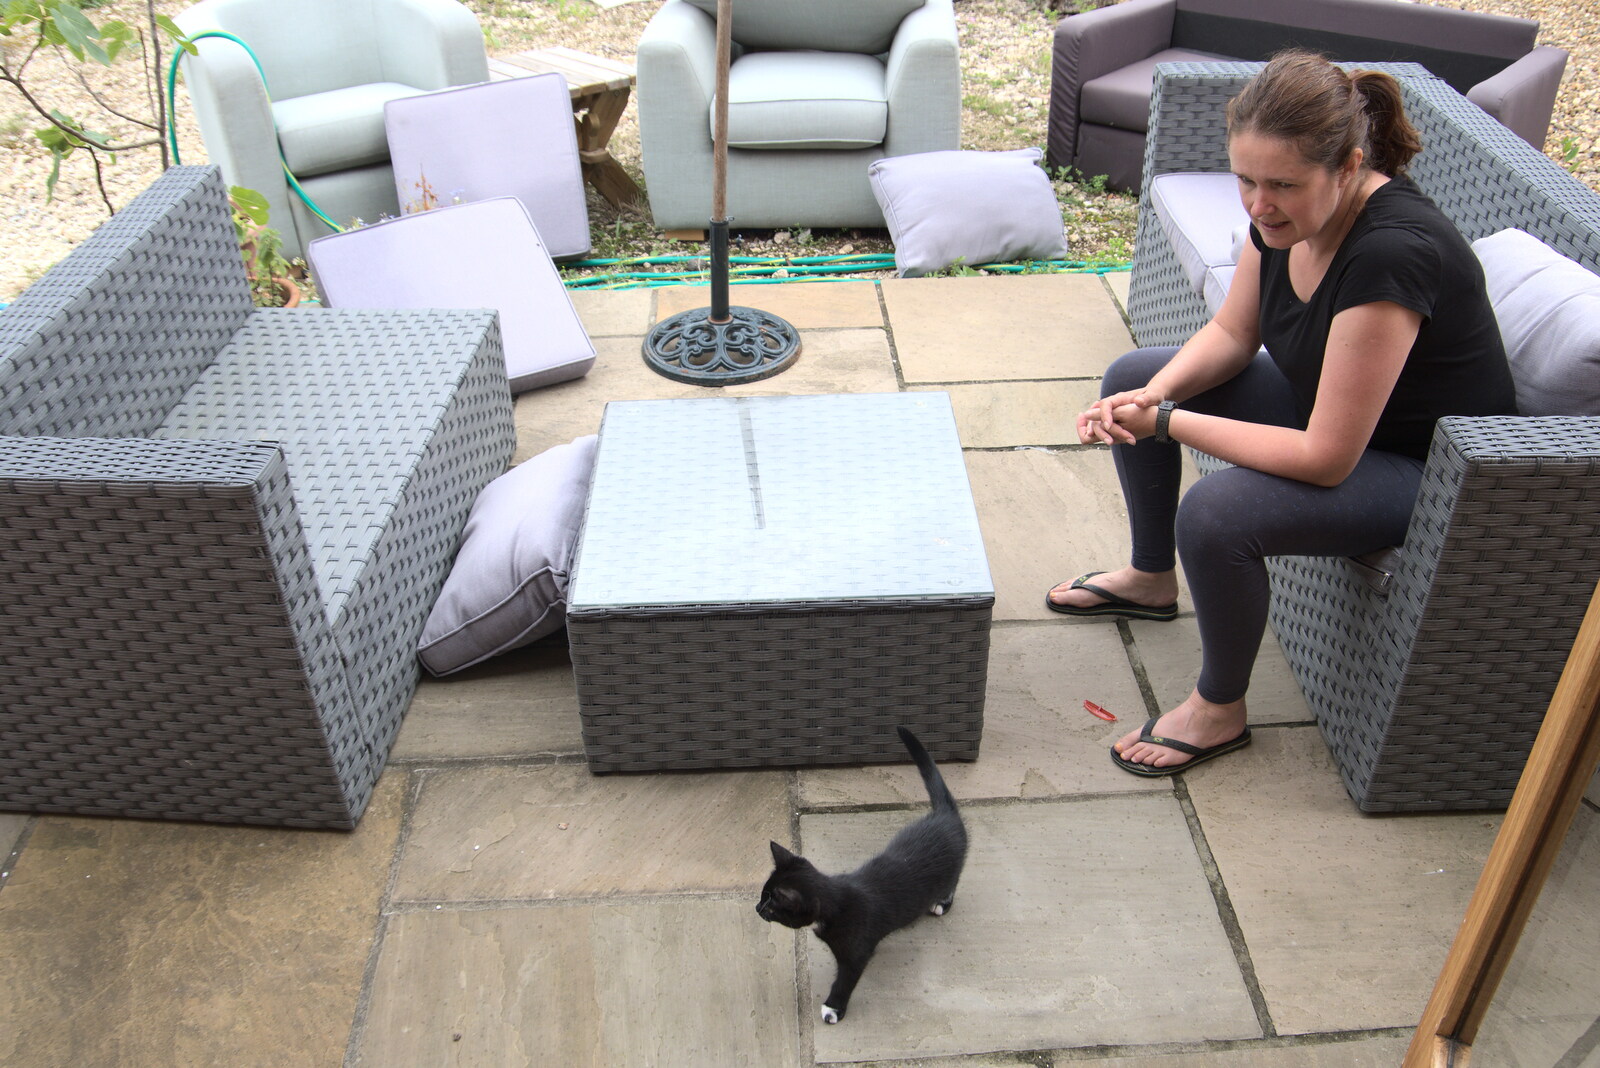 Molly Kitten roams around the patio from Meg-fest, and Sean Visits, Bressingham and Brome, Suffolk - 1st August 2021